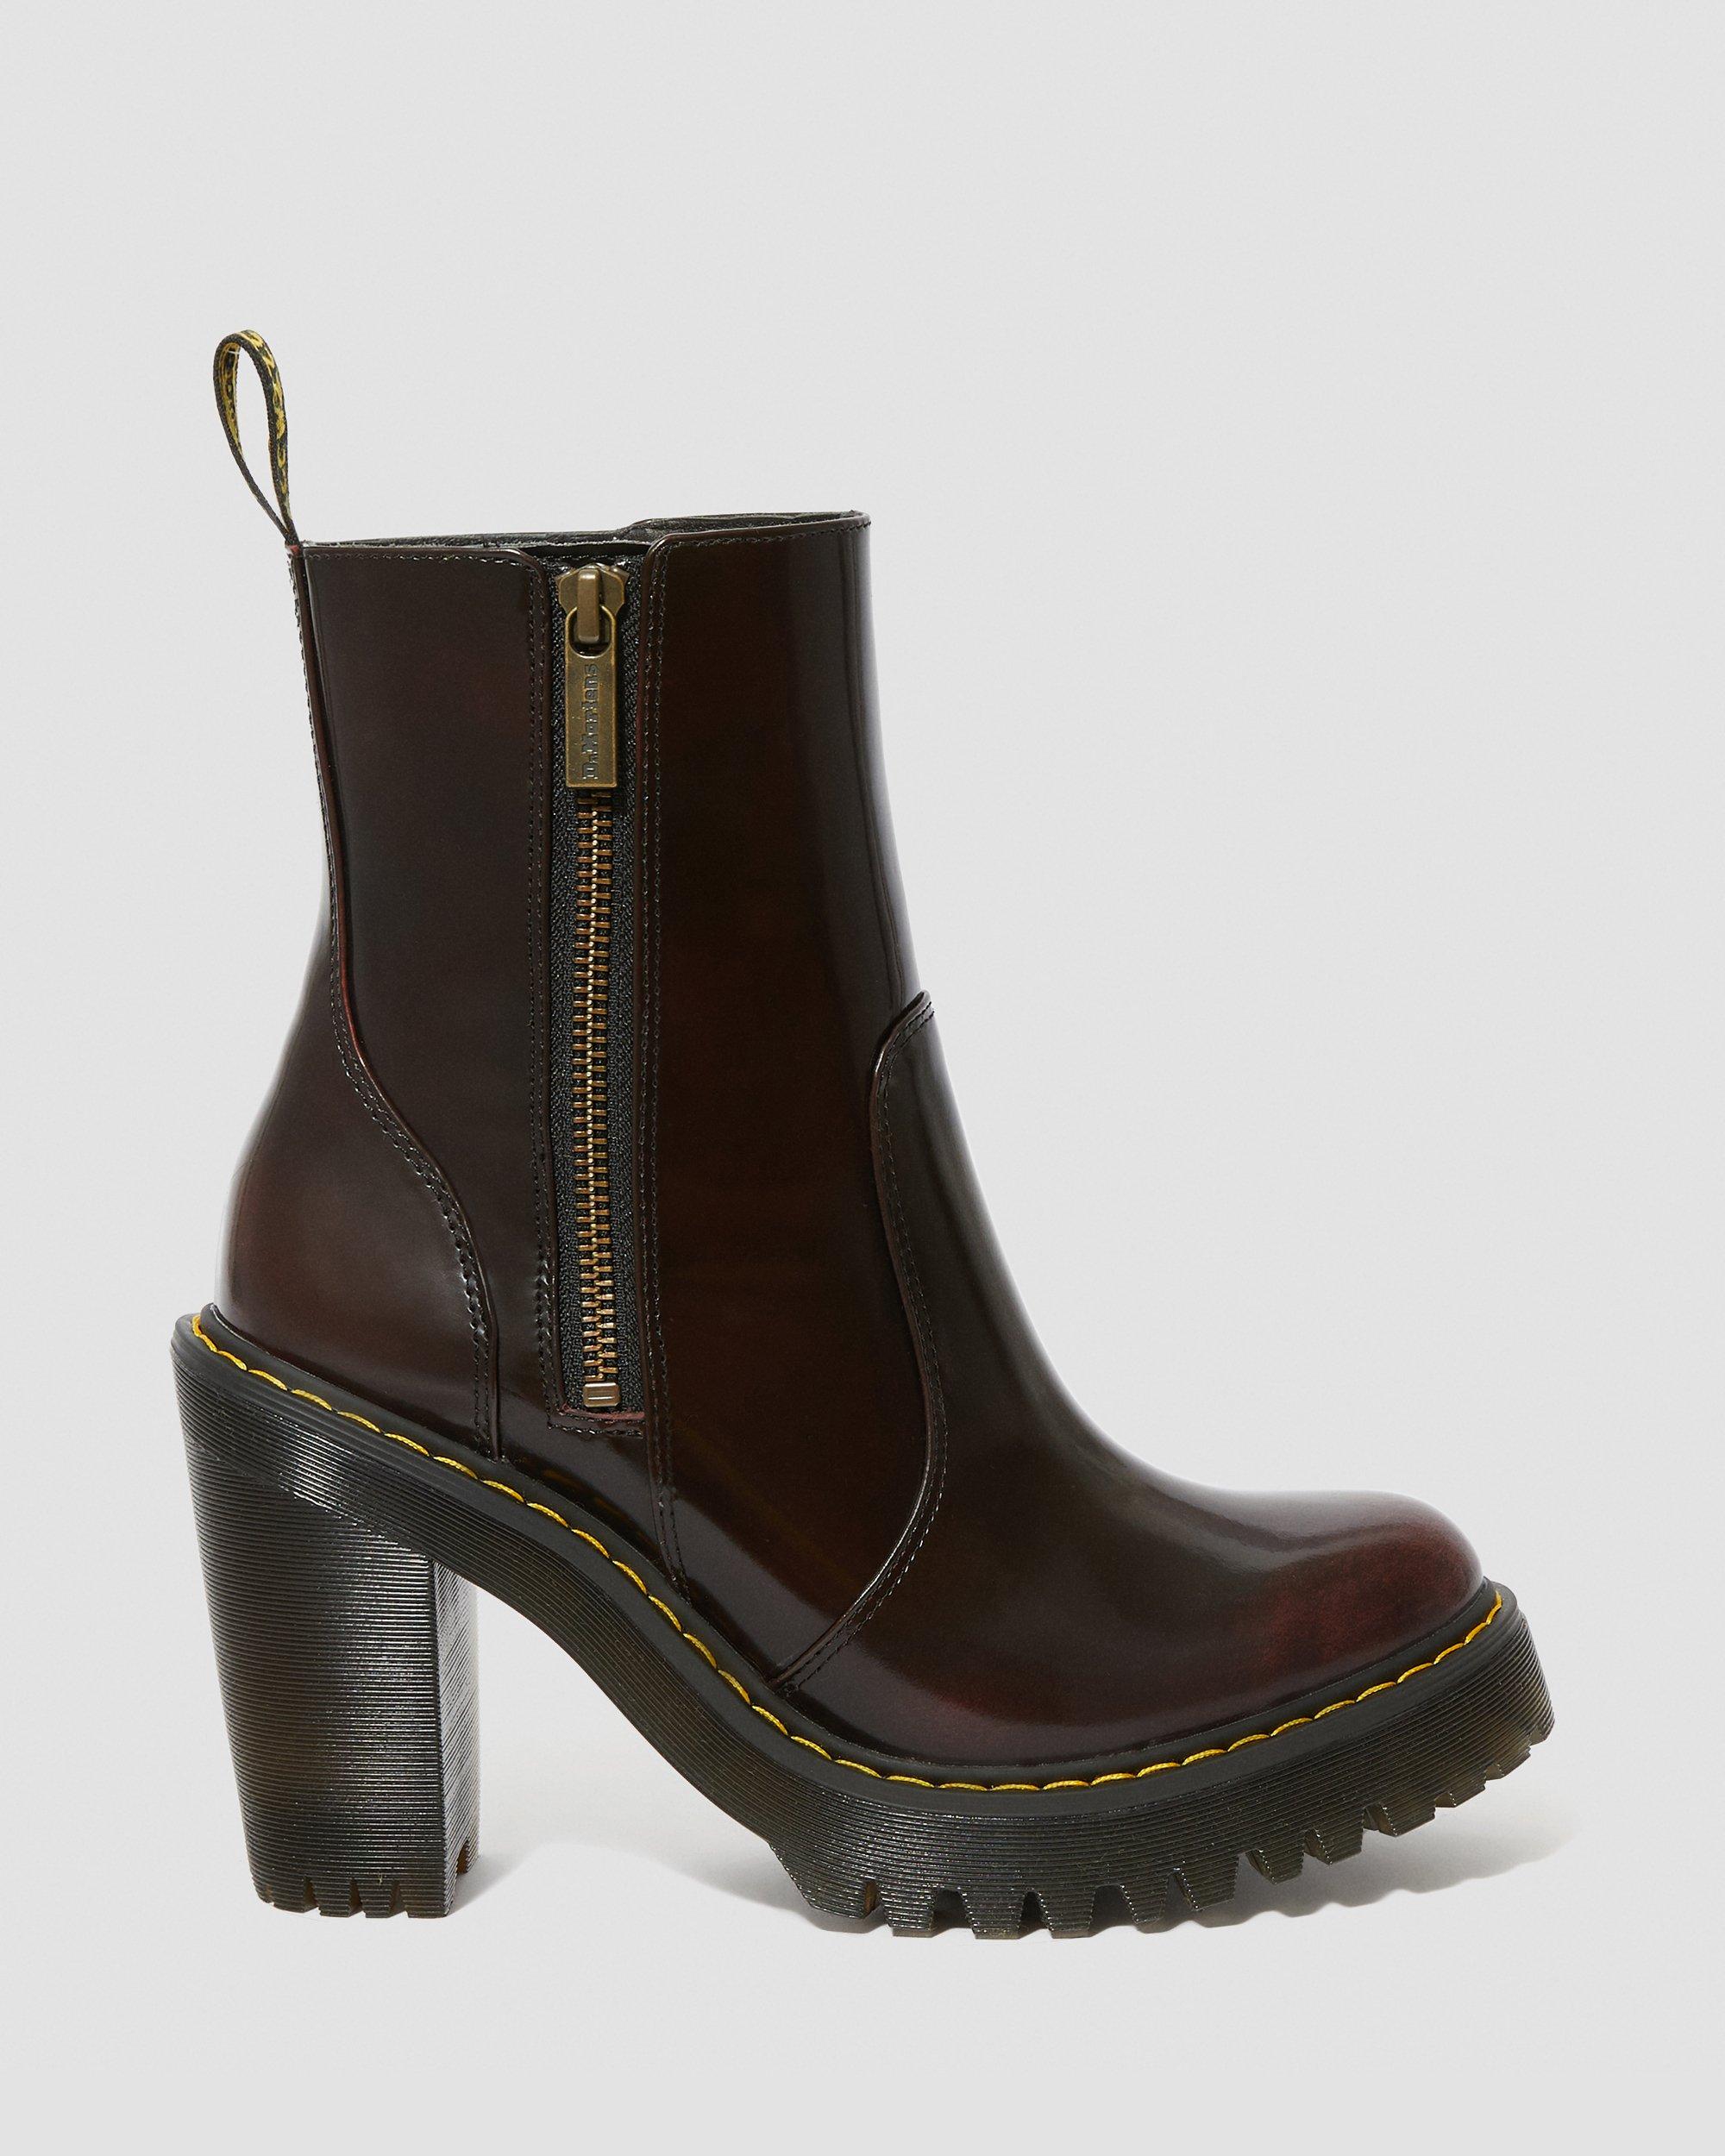 MAGDALENA II ARCADIA LEATHER ZIP BOOTS | Dr. Martens